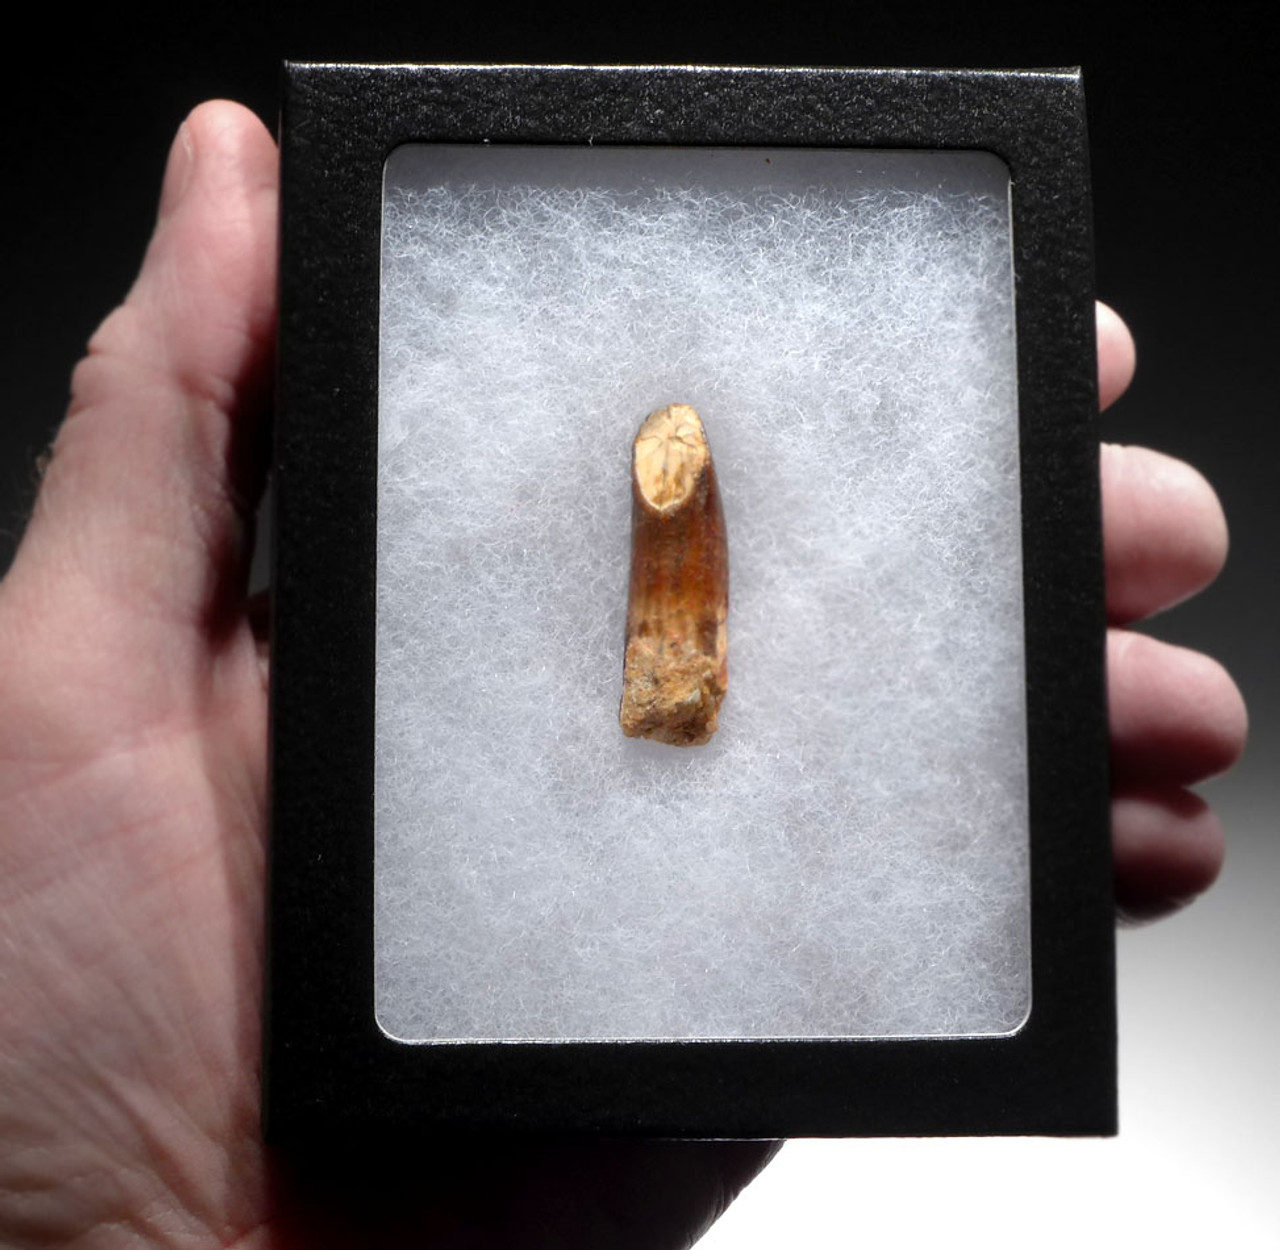 EXCEPTIONAL FOSSIL DINOSAUR TOOTH FROM A DIPLODOCOID SAUROPOD DINOSAUR *DT9-037